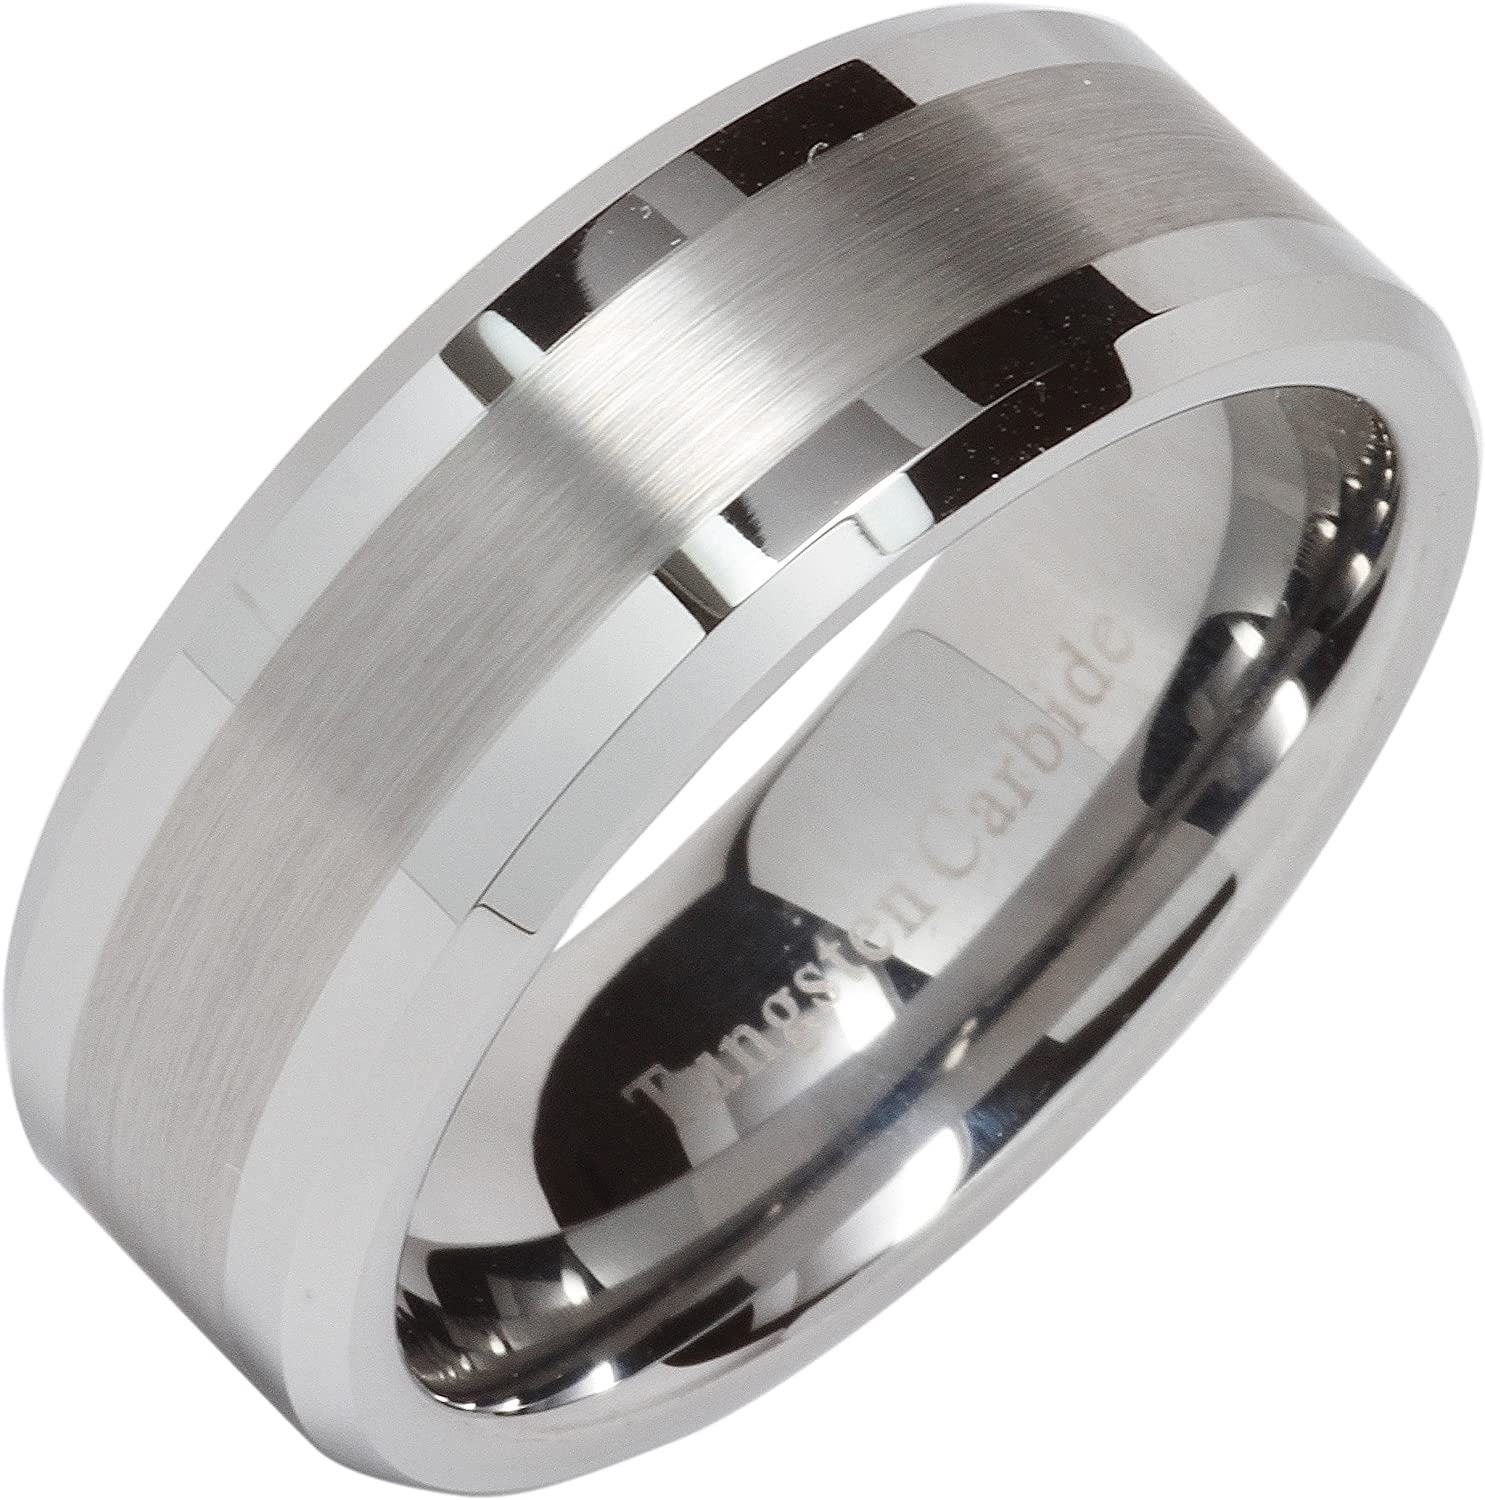 ATOP 8mm Mens Silver Tungsten Carbide Ring Wedding Band,Thickness 2.3-2.5mm